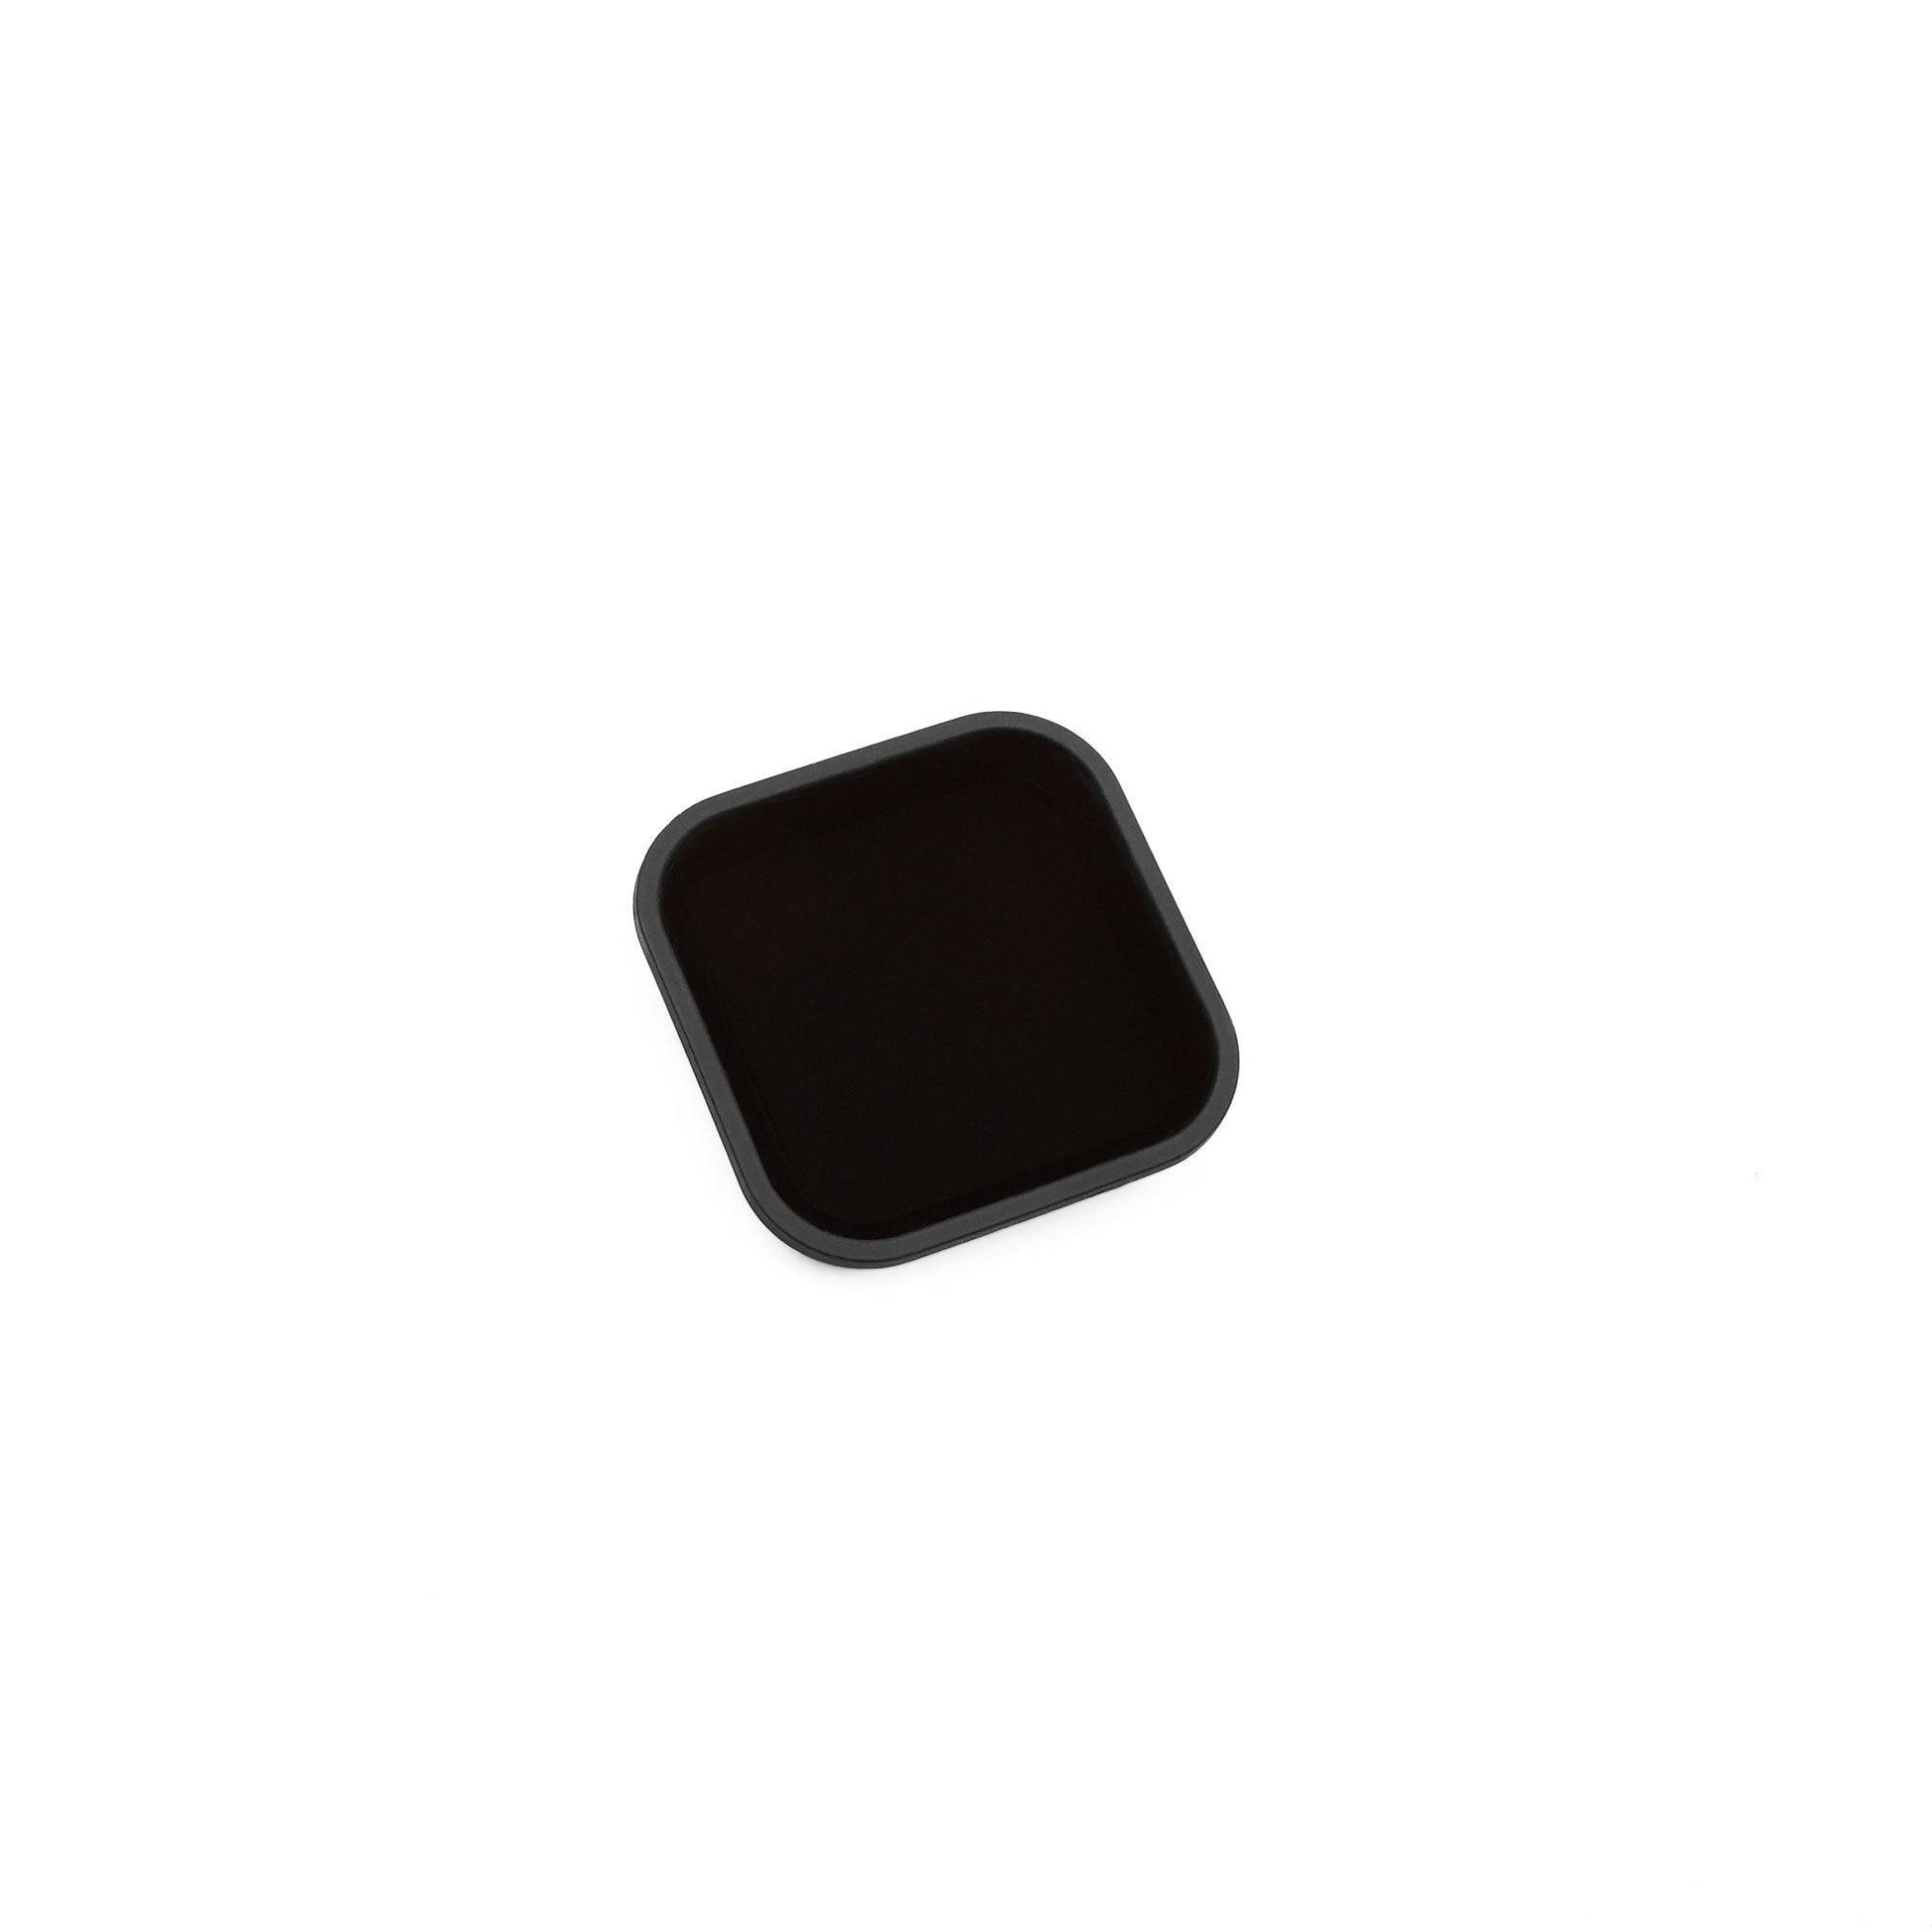 GEPRC ND16 Glass ND Filter - Suitable For Installing Additional Camera Lens Neutral Density Filter For DIY RC FPV Quadcopter Drone - RCDrone